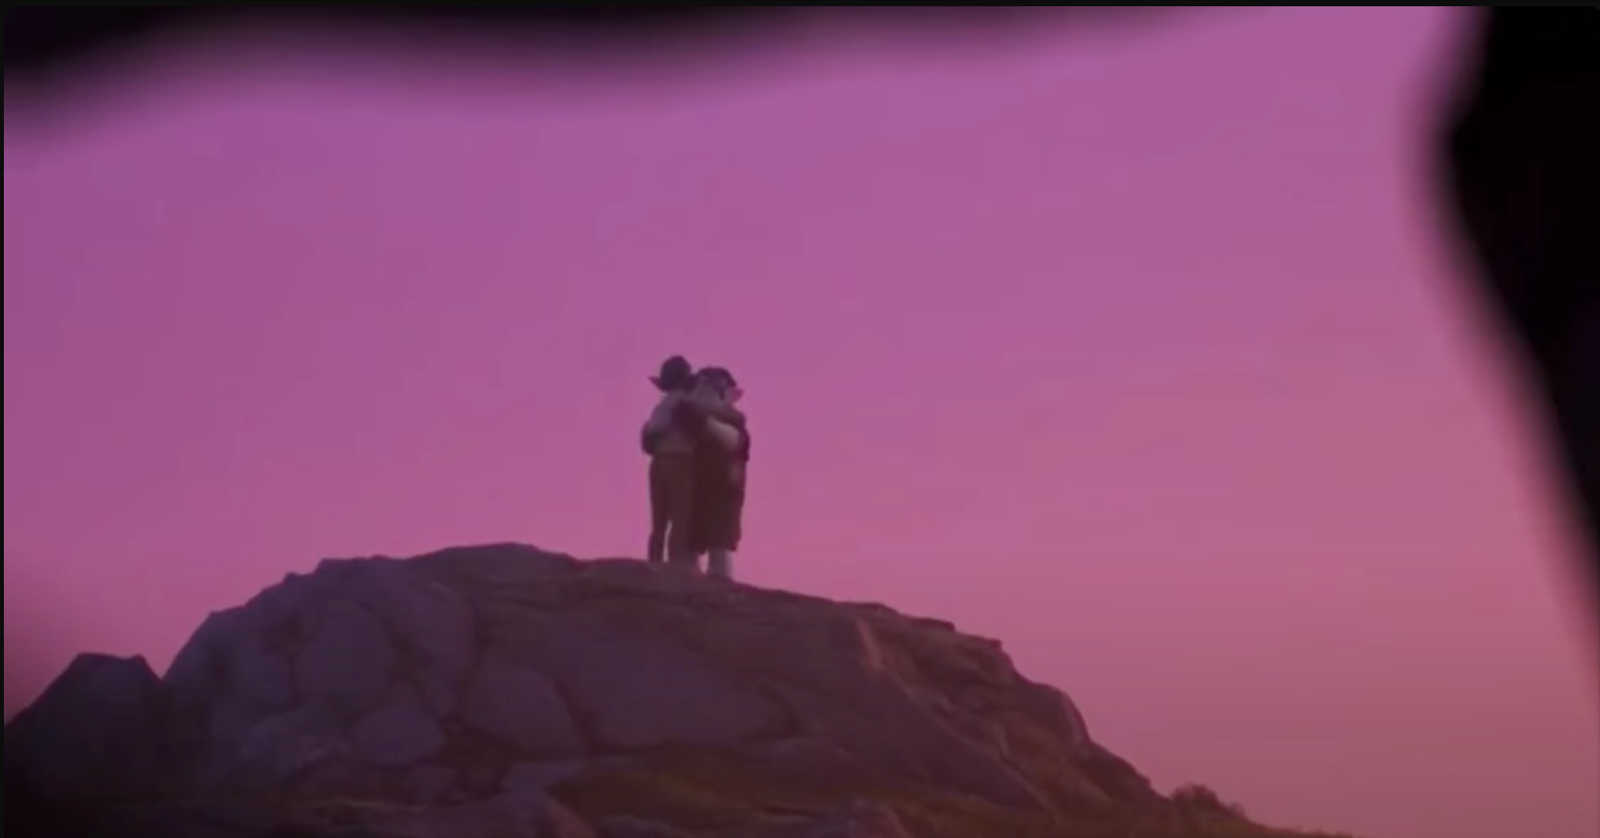 Barley from the movie Onward hugs his father before his dad goes back to being a ghost.